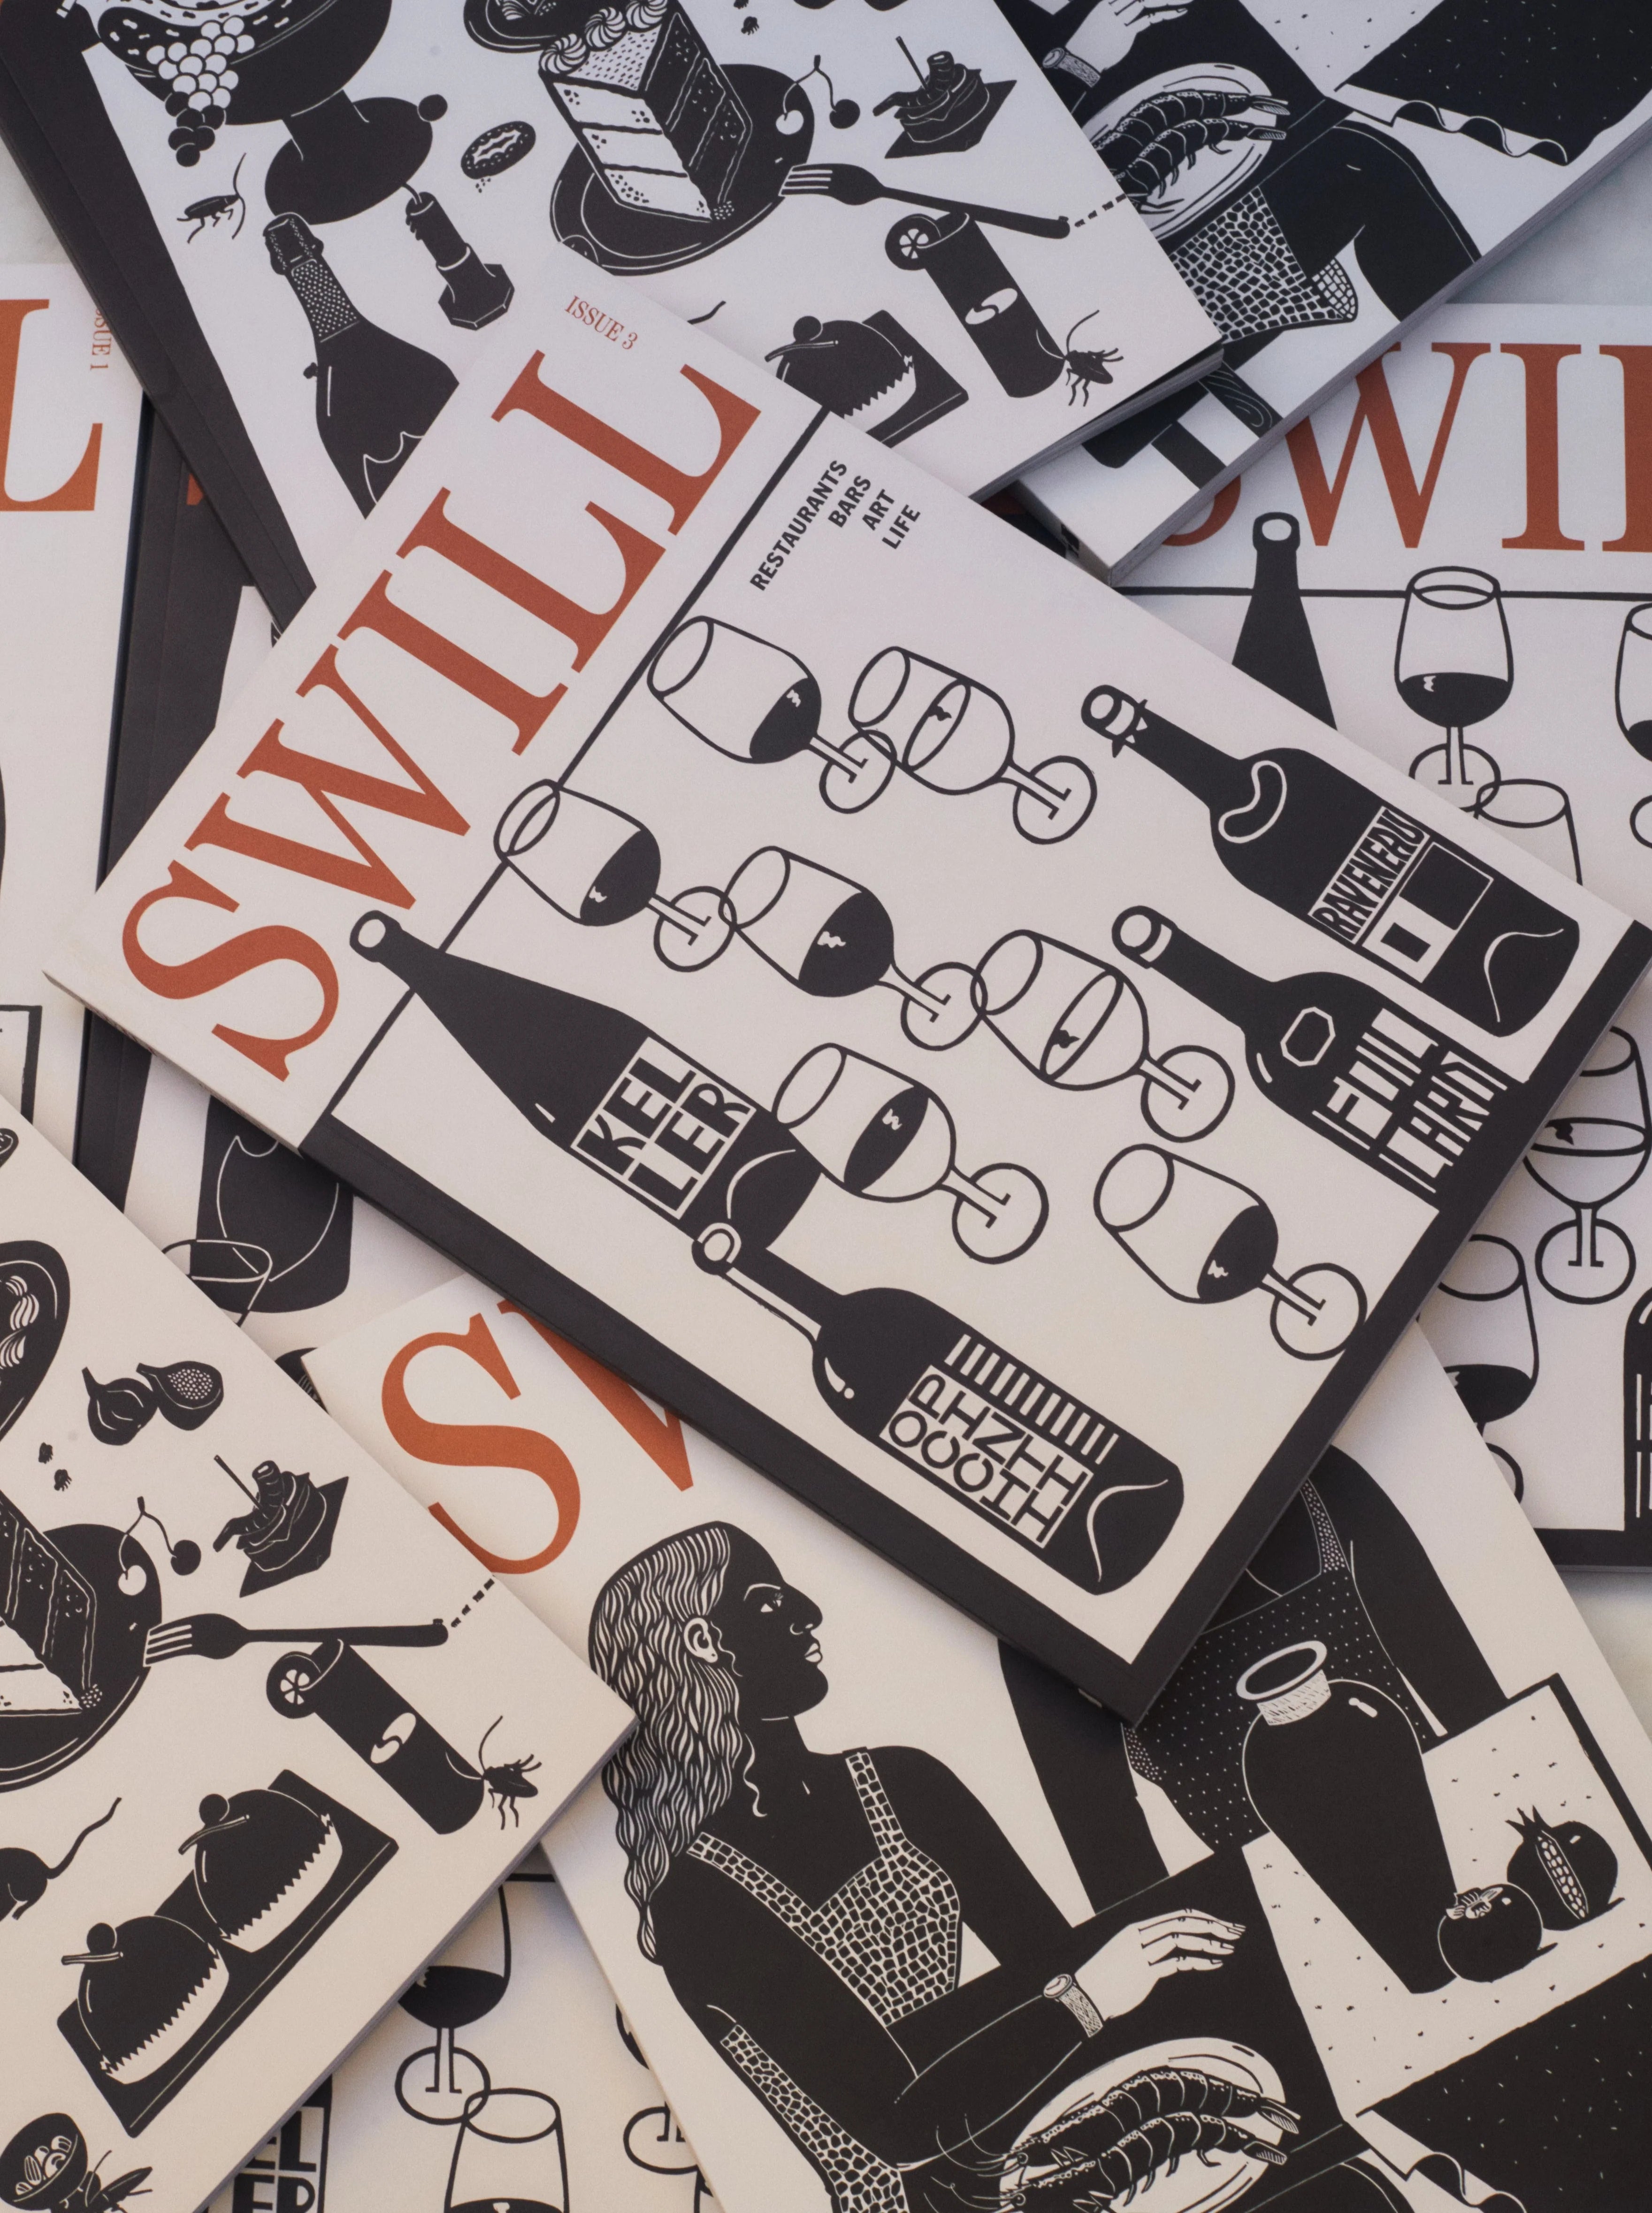 Swill Magazine - The First Four - Bundle